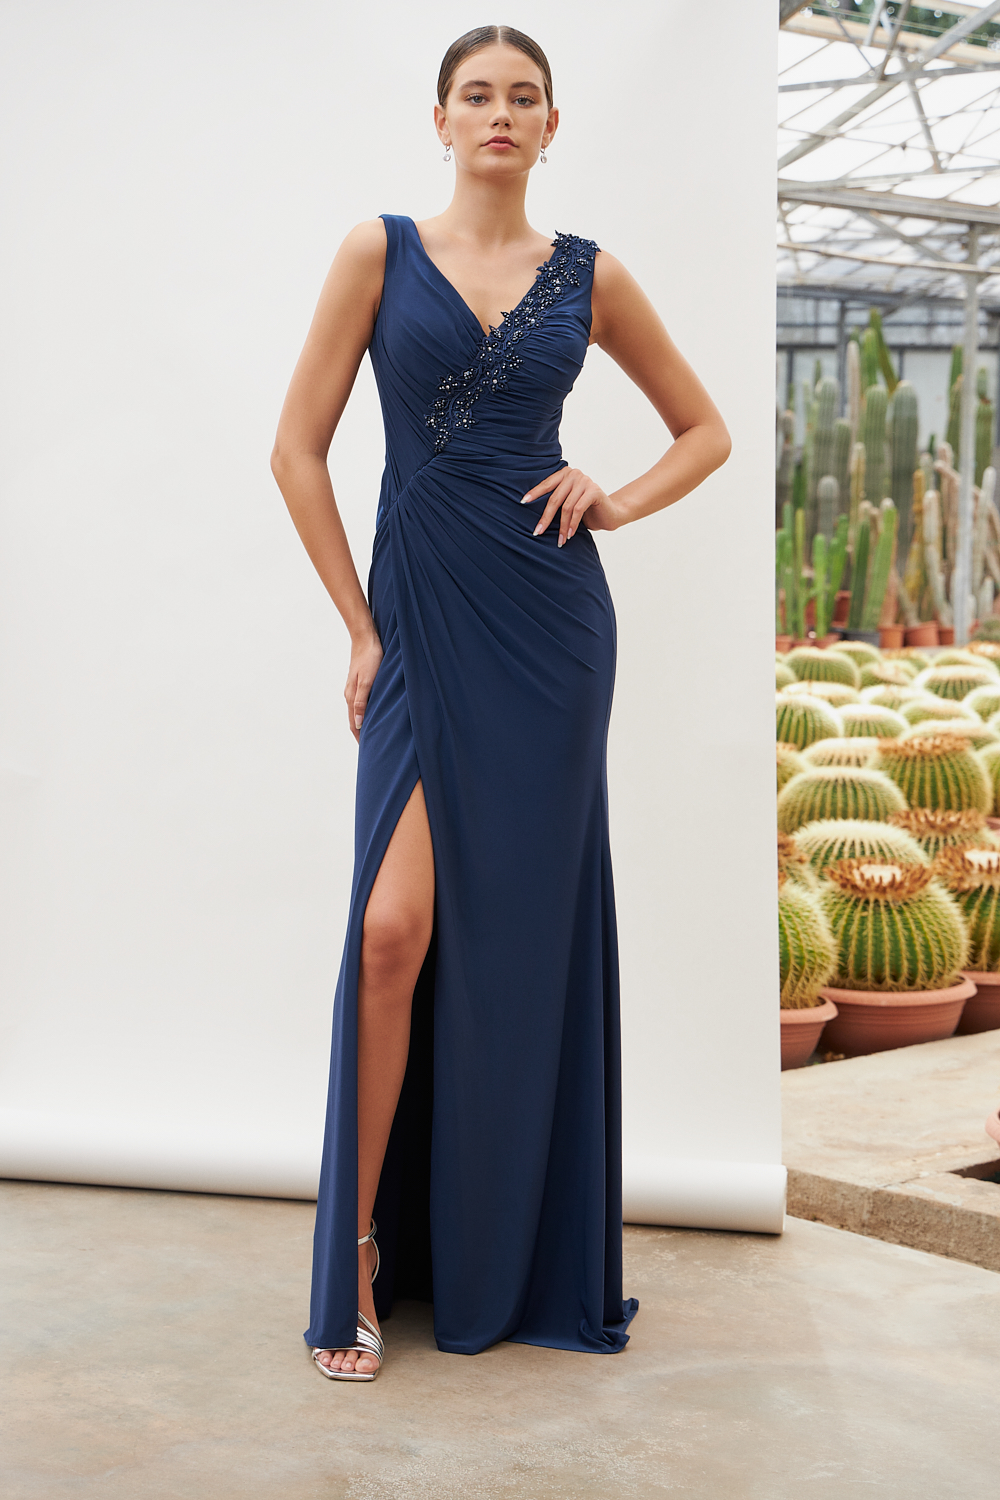 Classic Dresses / Long classic dress with beaded top, wide straps and opening